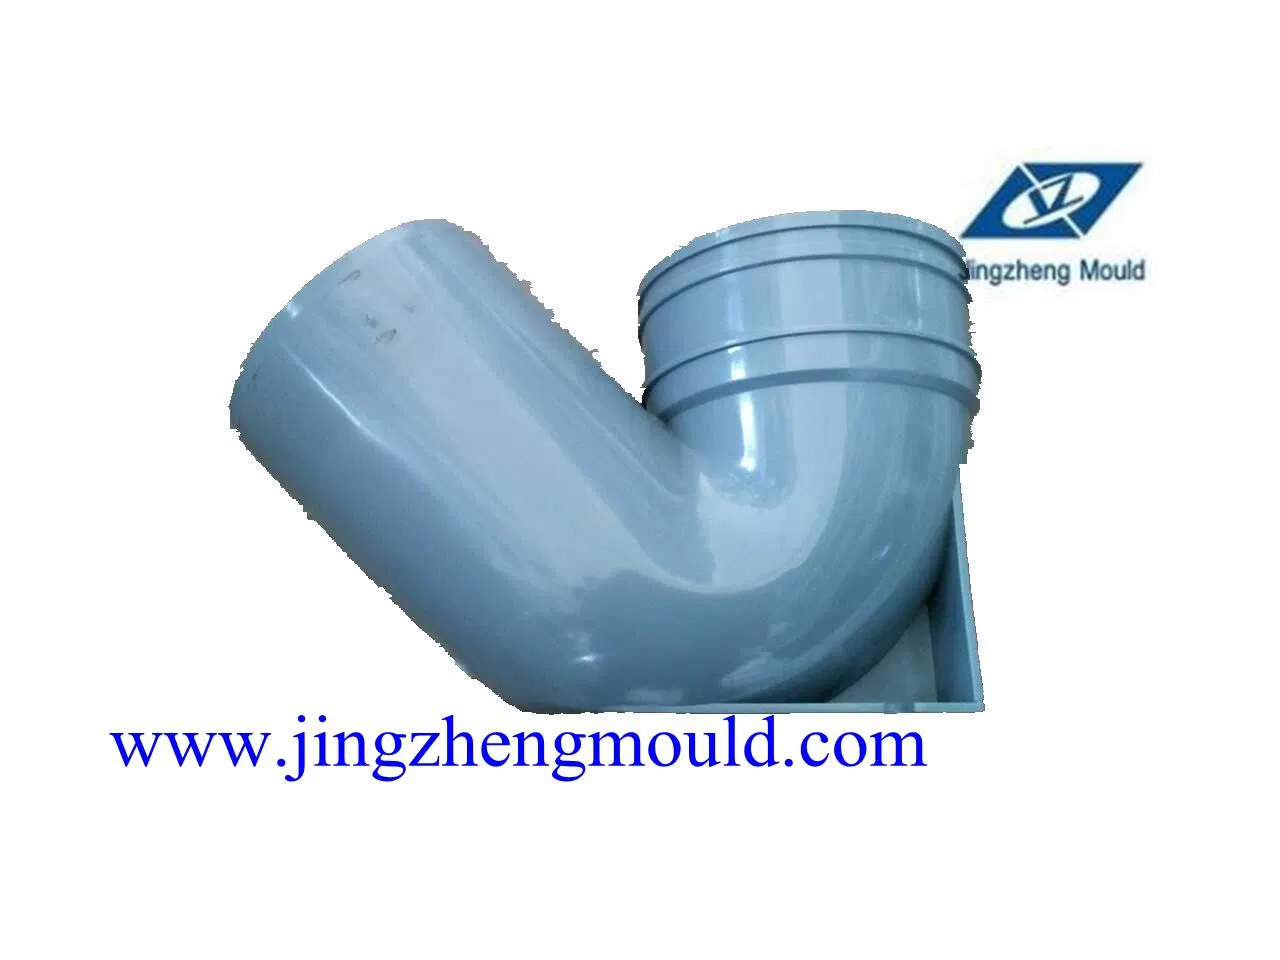 Plastic Pipe Fitting Injection Mould Making